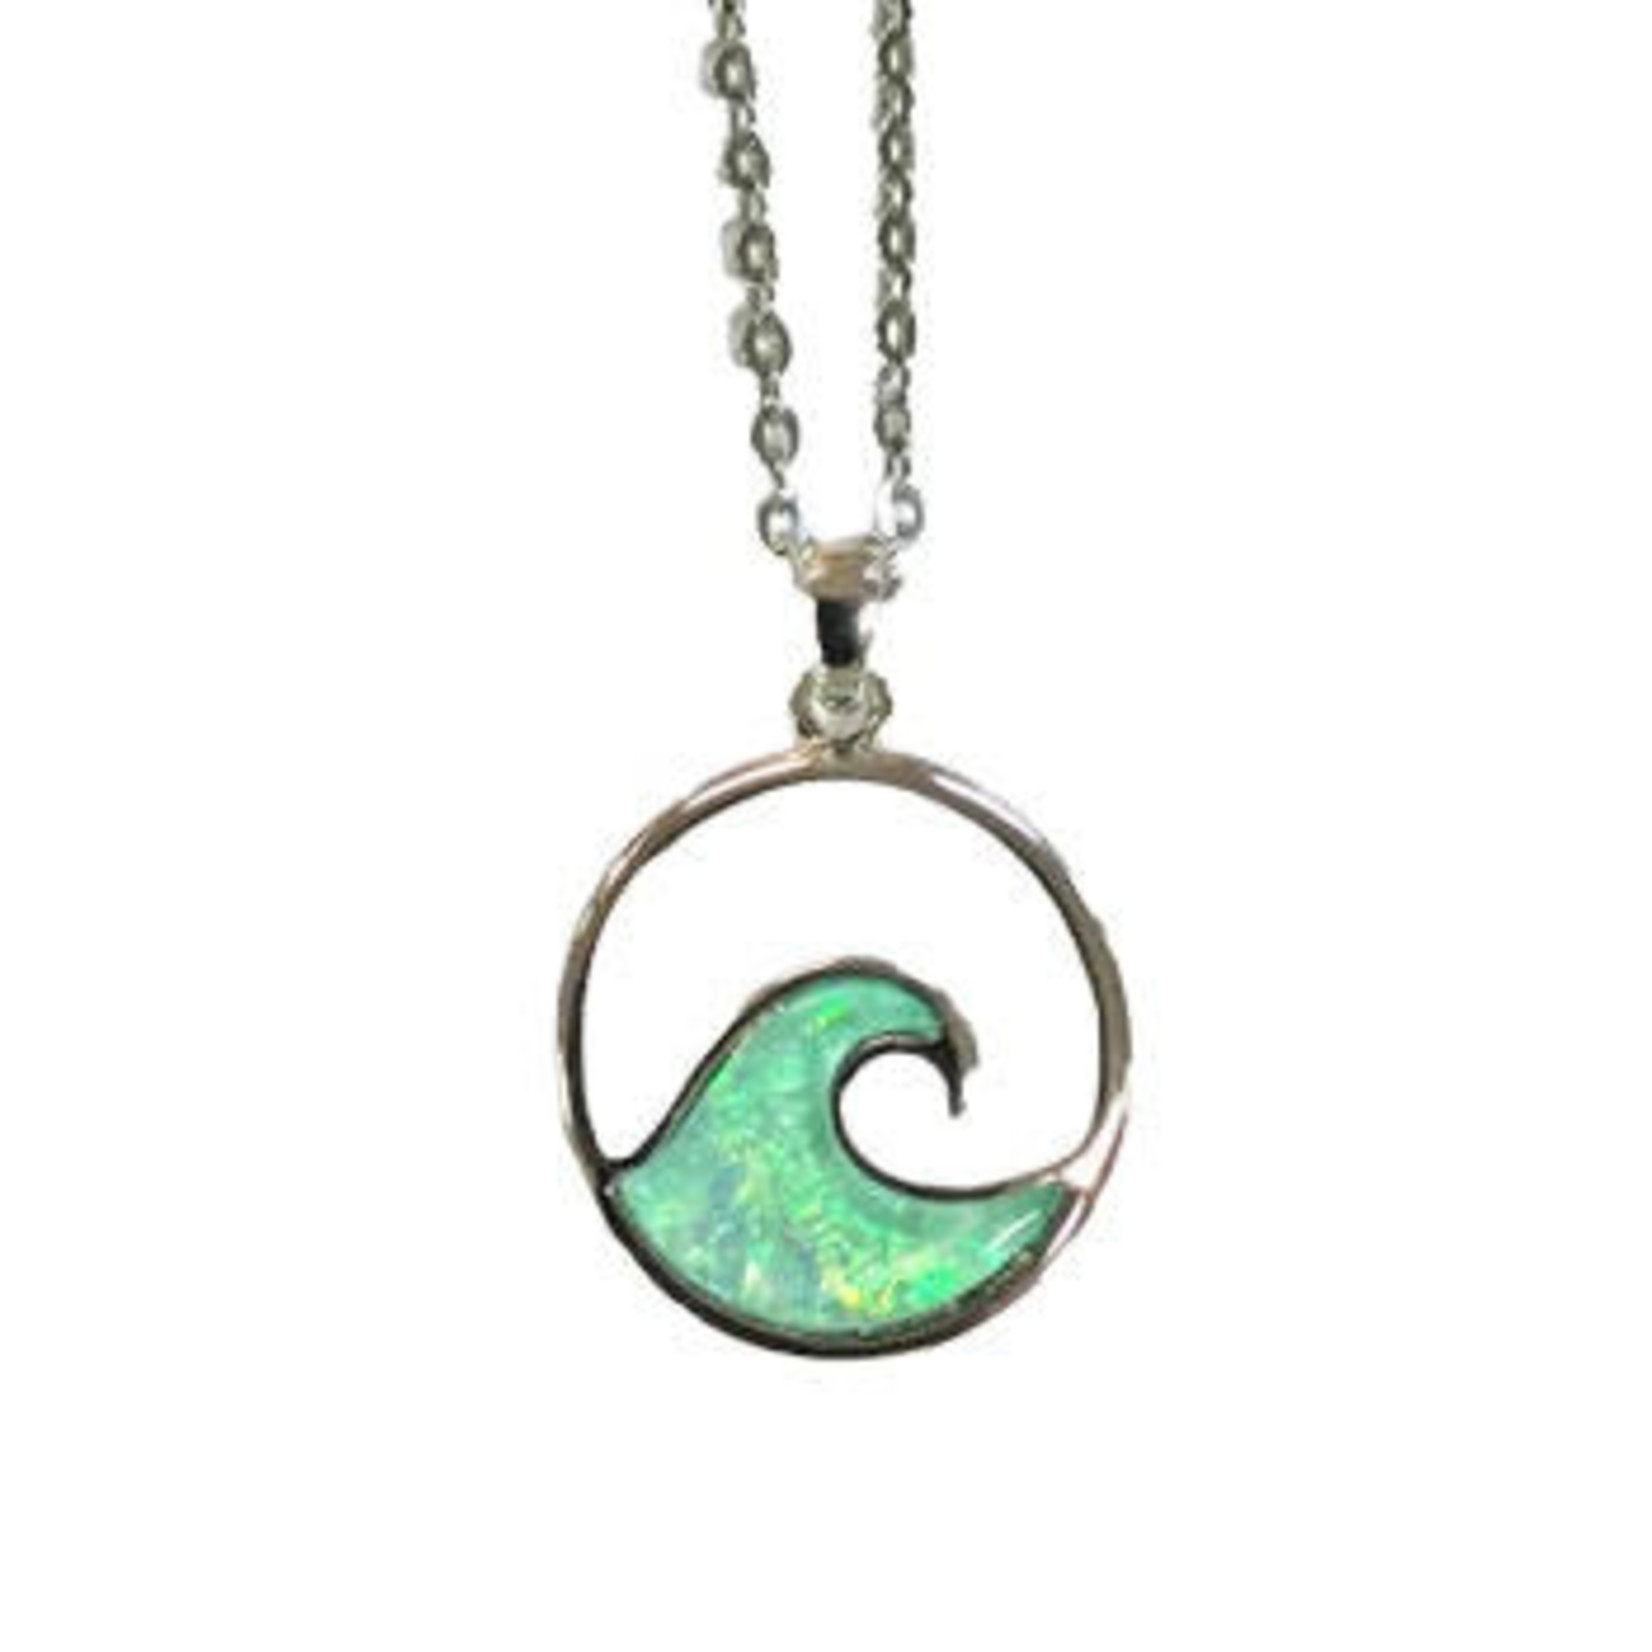 Opal Inspired Resin Pendant with Chain Wave